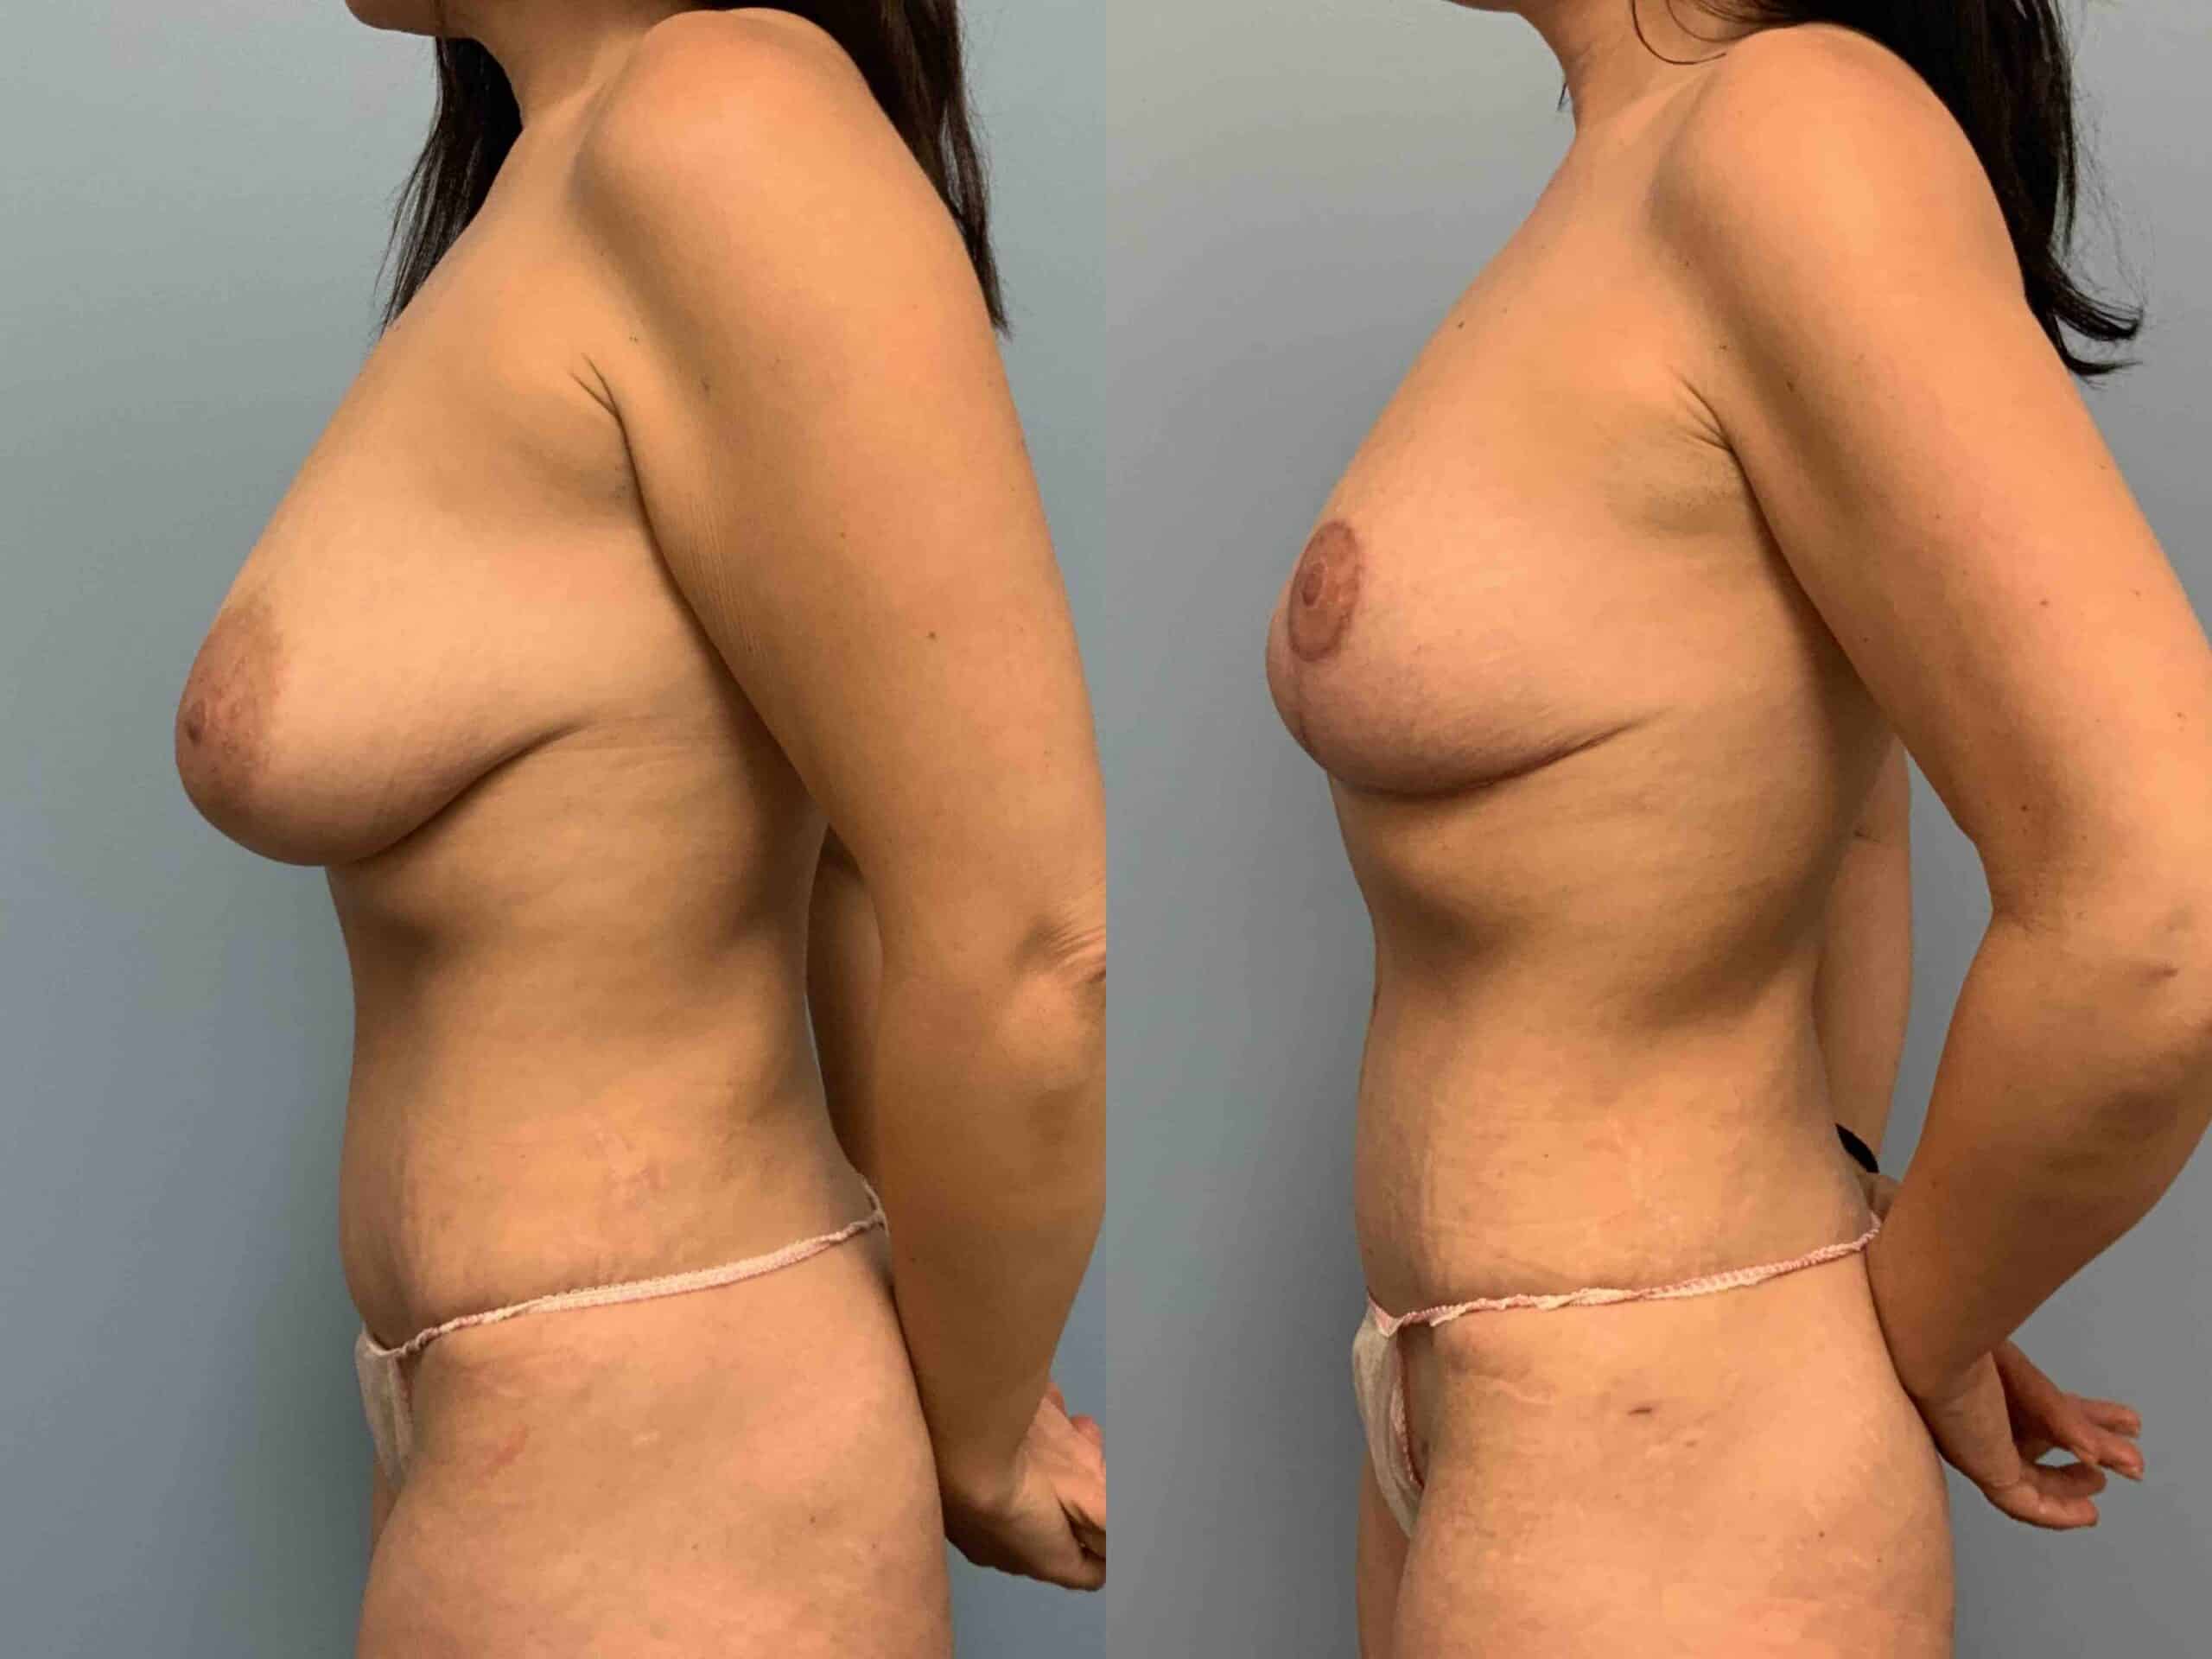 Before and after, patient 3 mo post op from Breast Reduction, VASER Abdomen and Flanks, Axillary Roll Reselection procedures performed by Dr. Paul Vanek